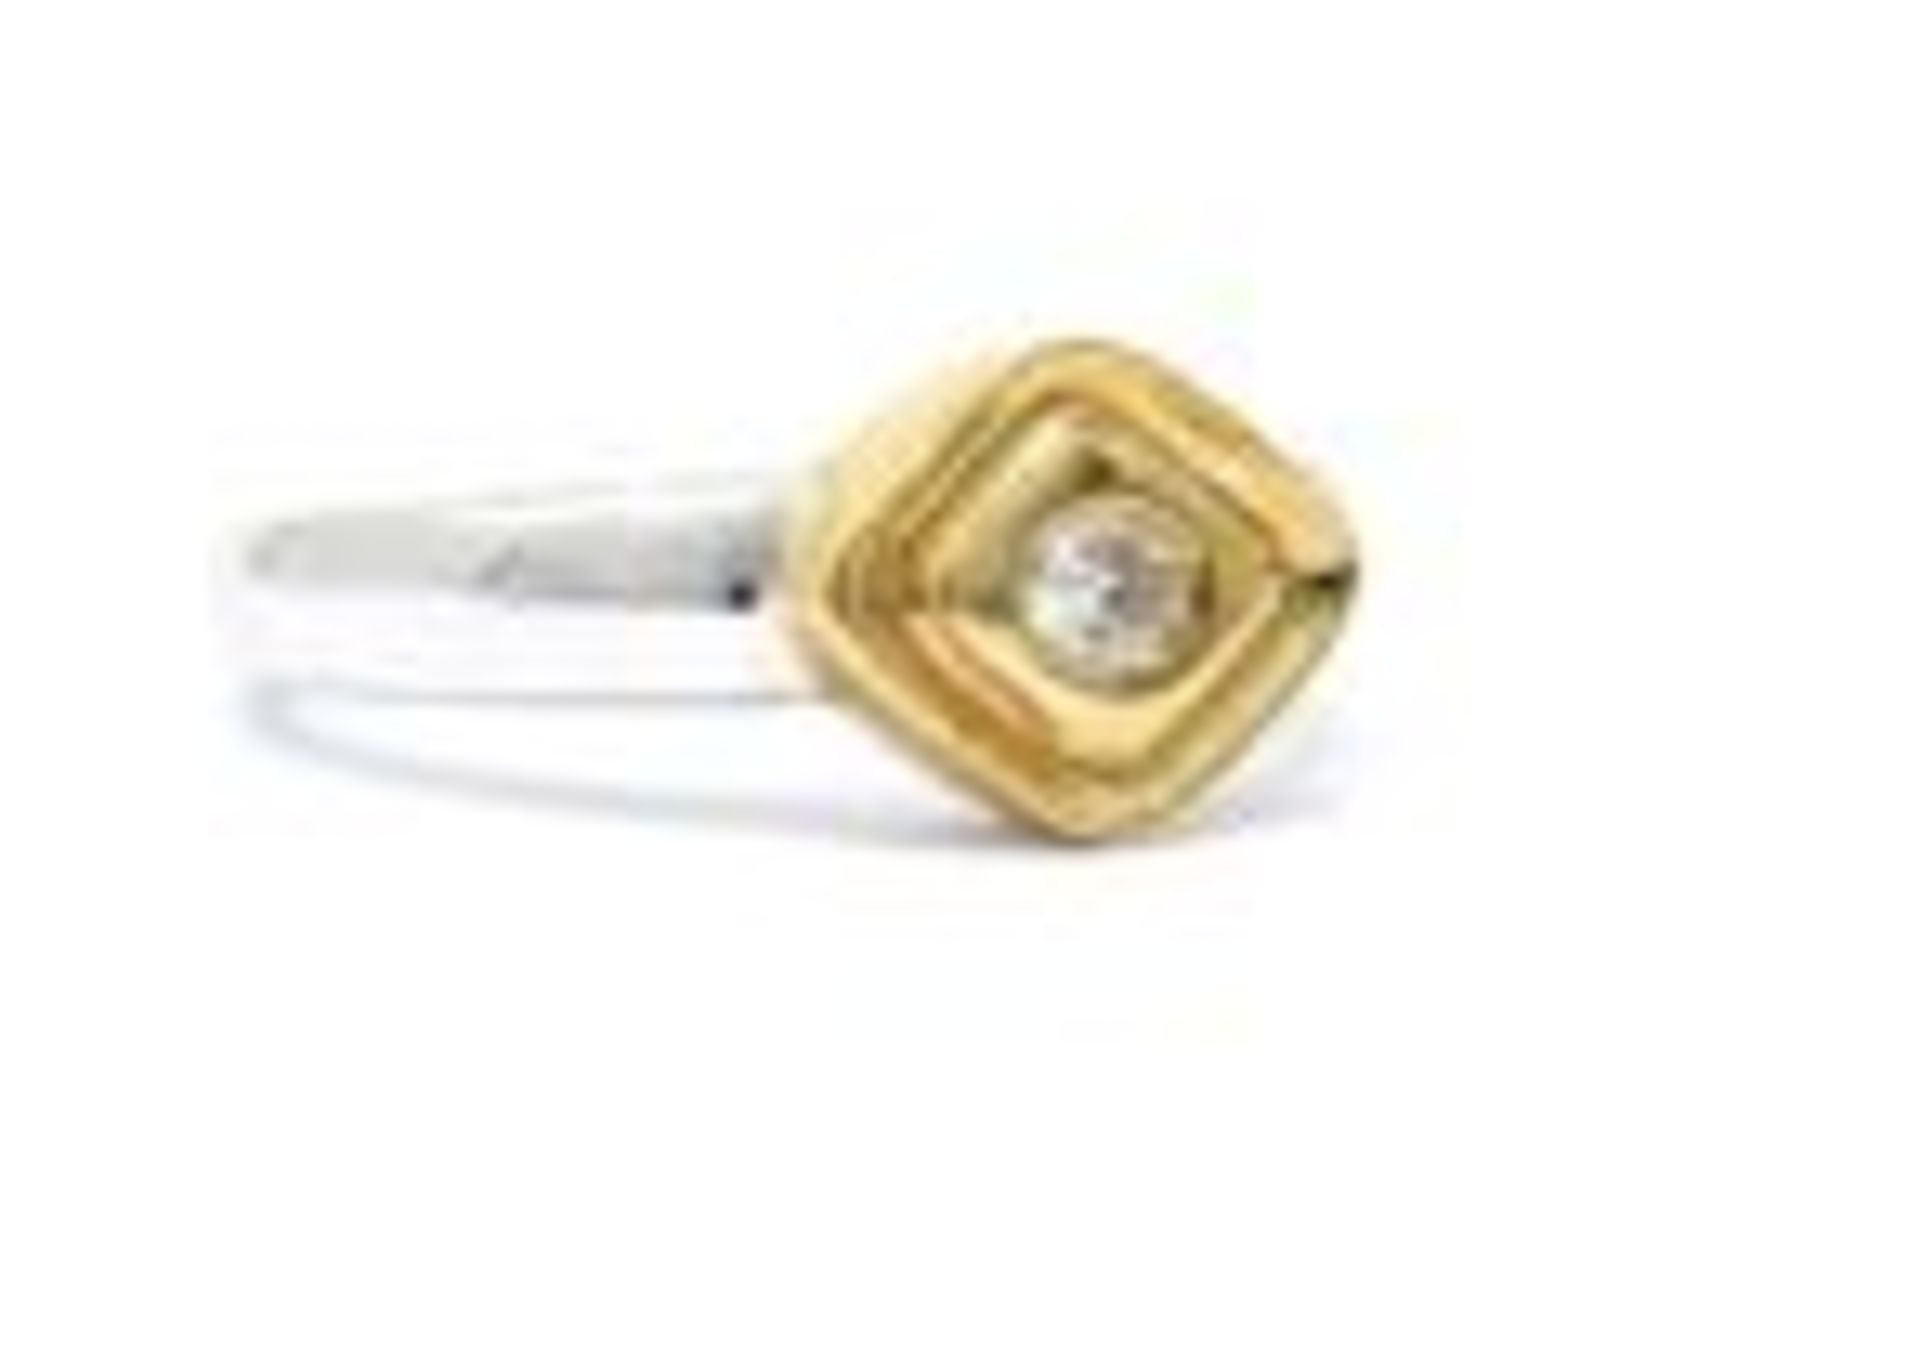 Two Tone Diamond Ring, 9ct Yellow/White Gold, Weight 4.86g, Diamond Weight 0.20ct, Colour H, Clarity